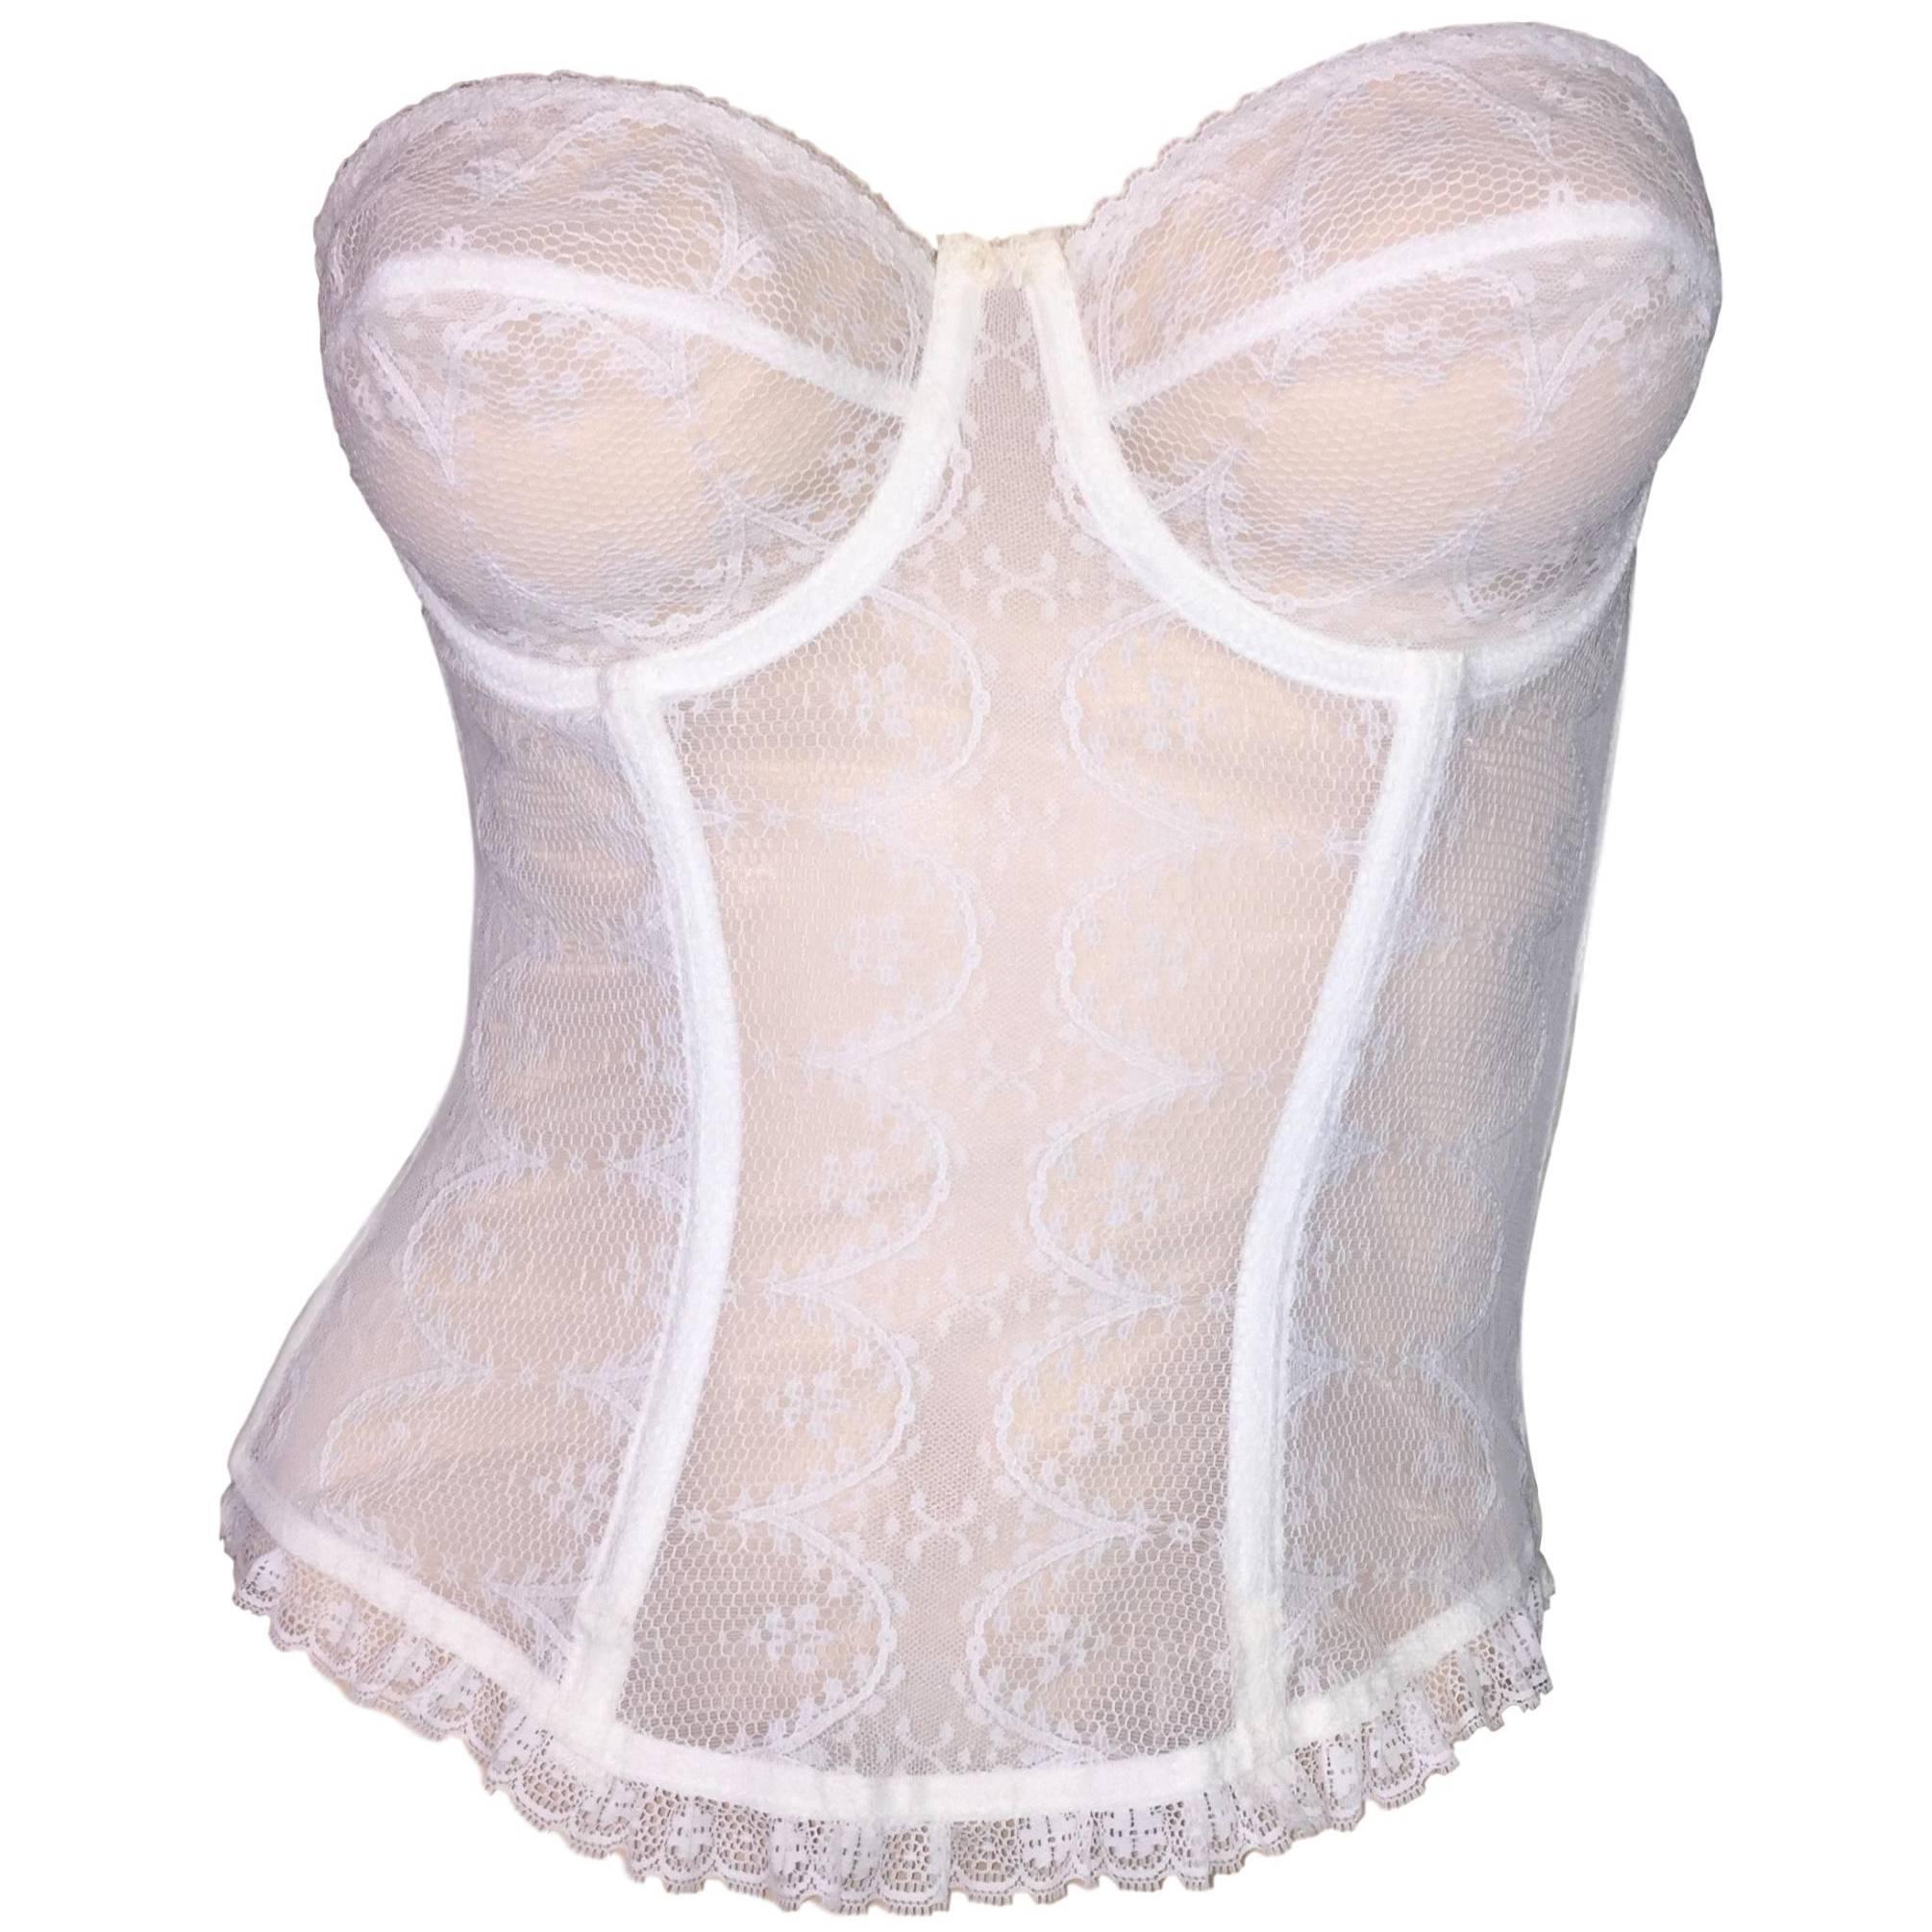 1990's Christian Dior Sheer White Lace Strapless Corset Bustier Top 36C XS/S